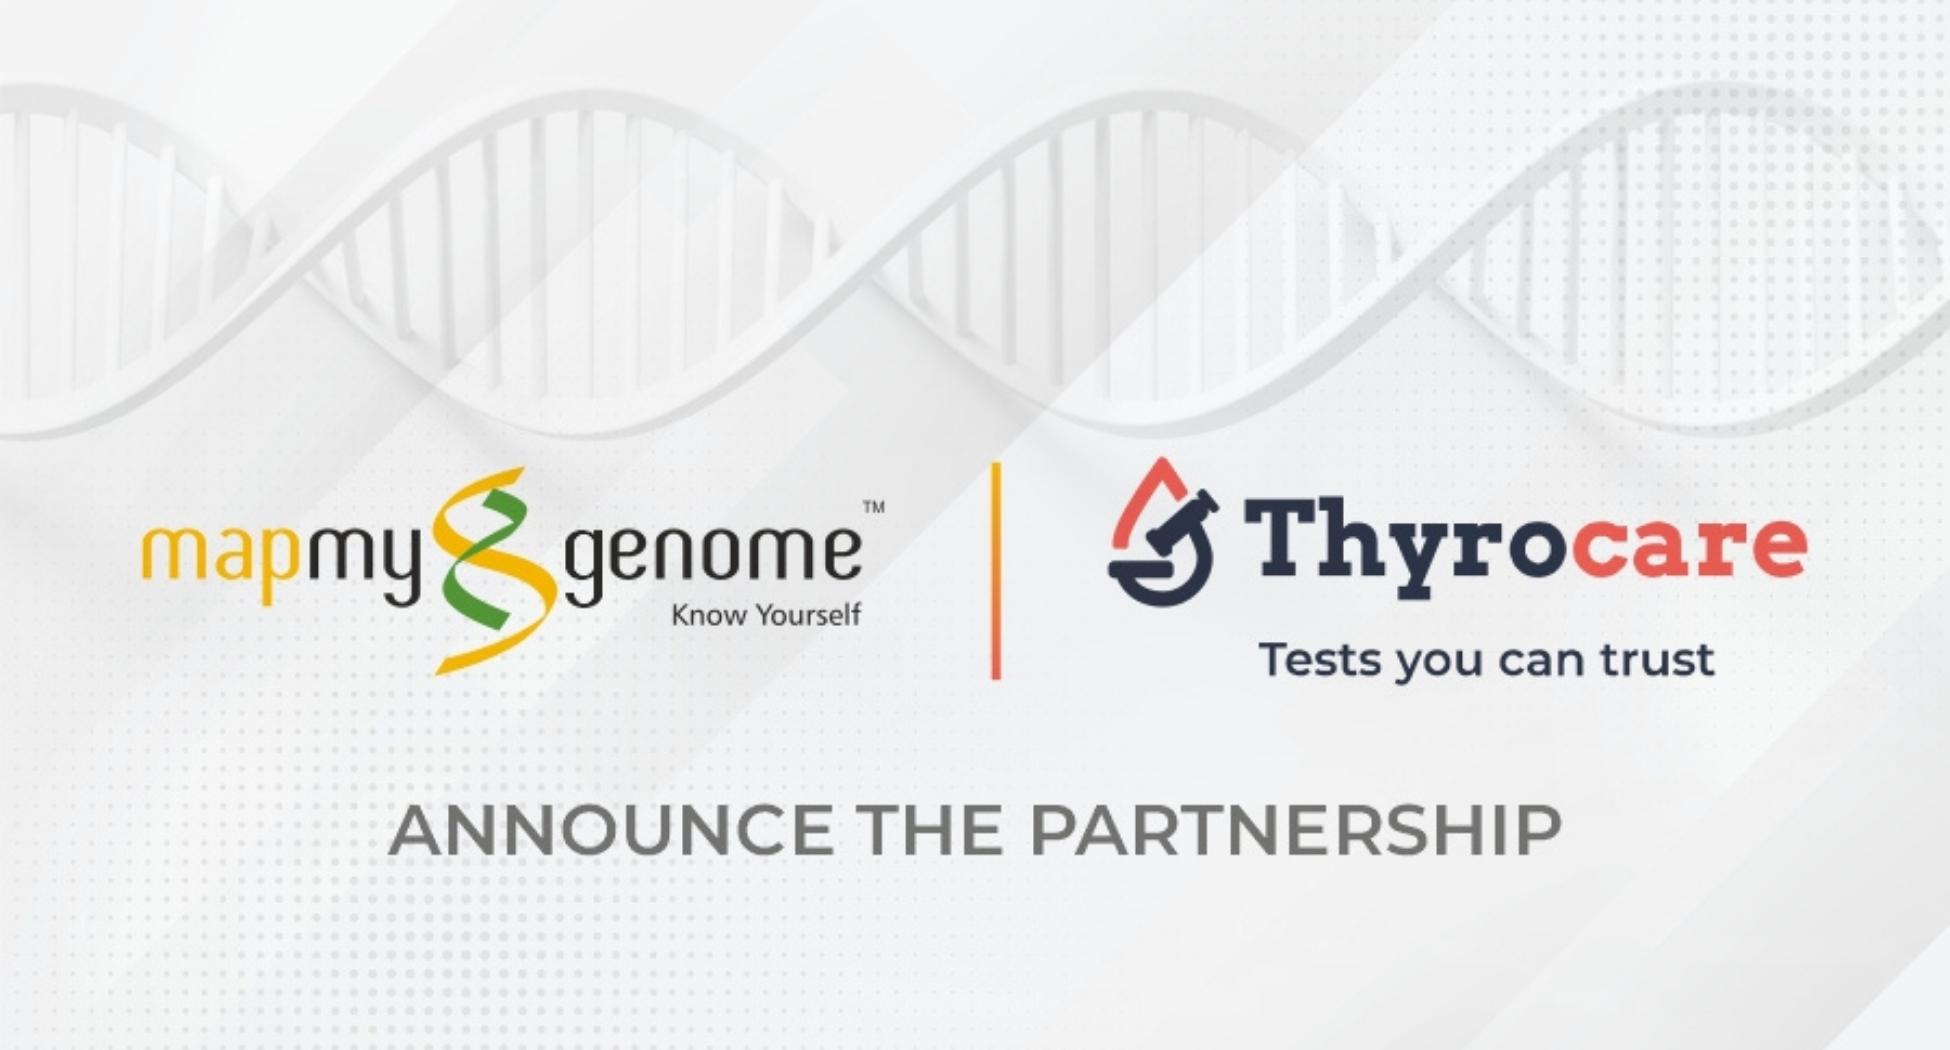 Mapmygenome partners with Thyrocare